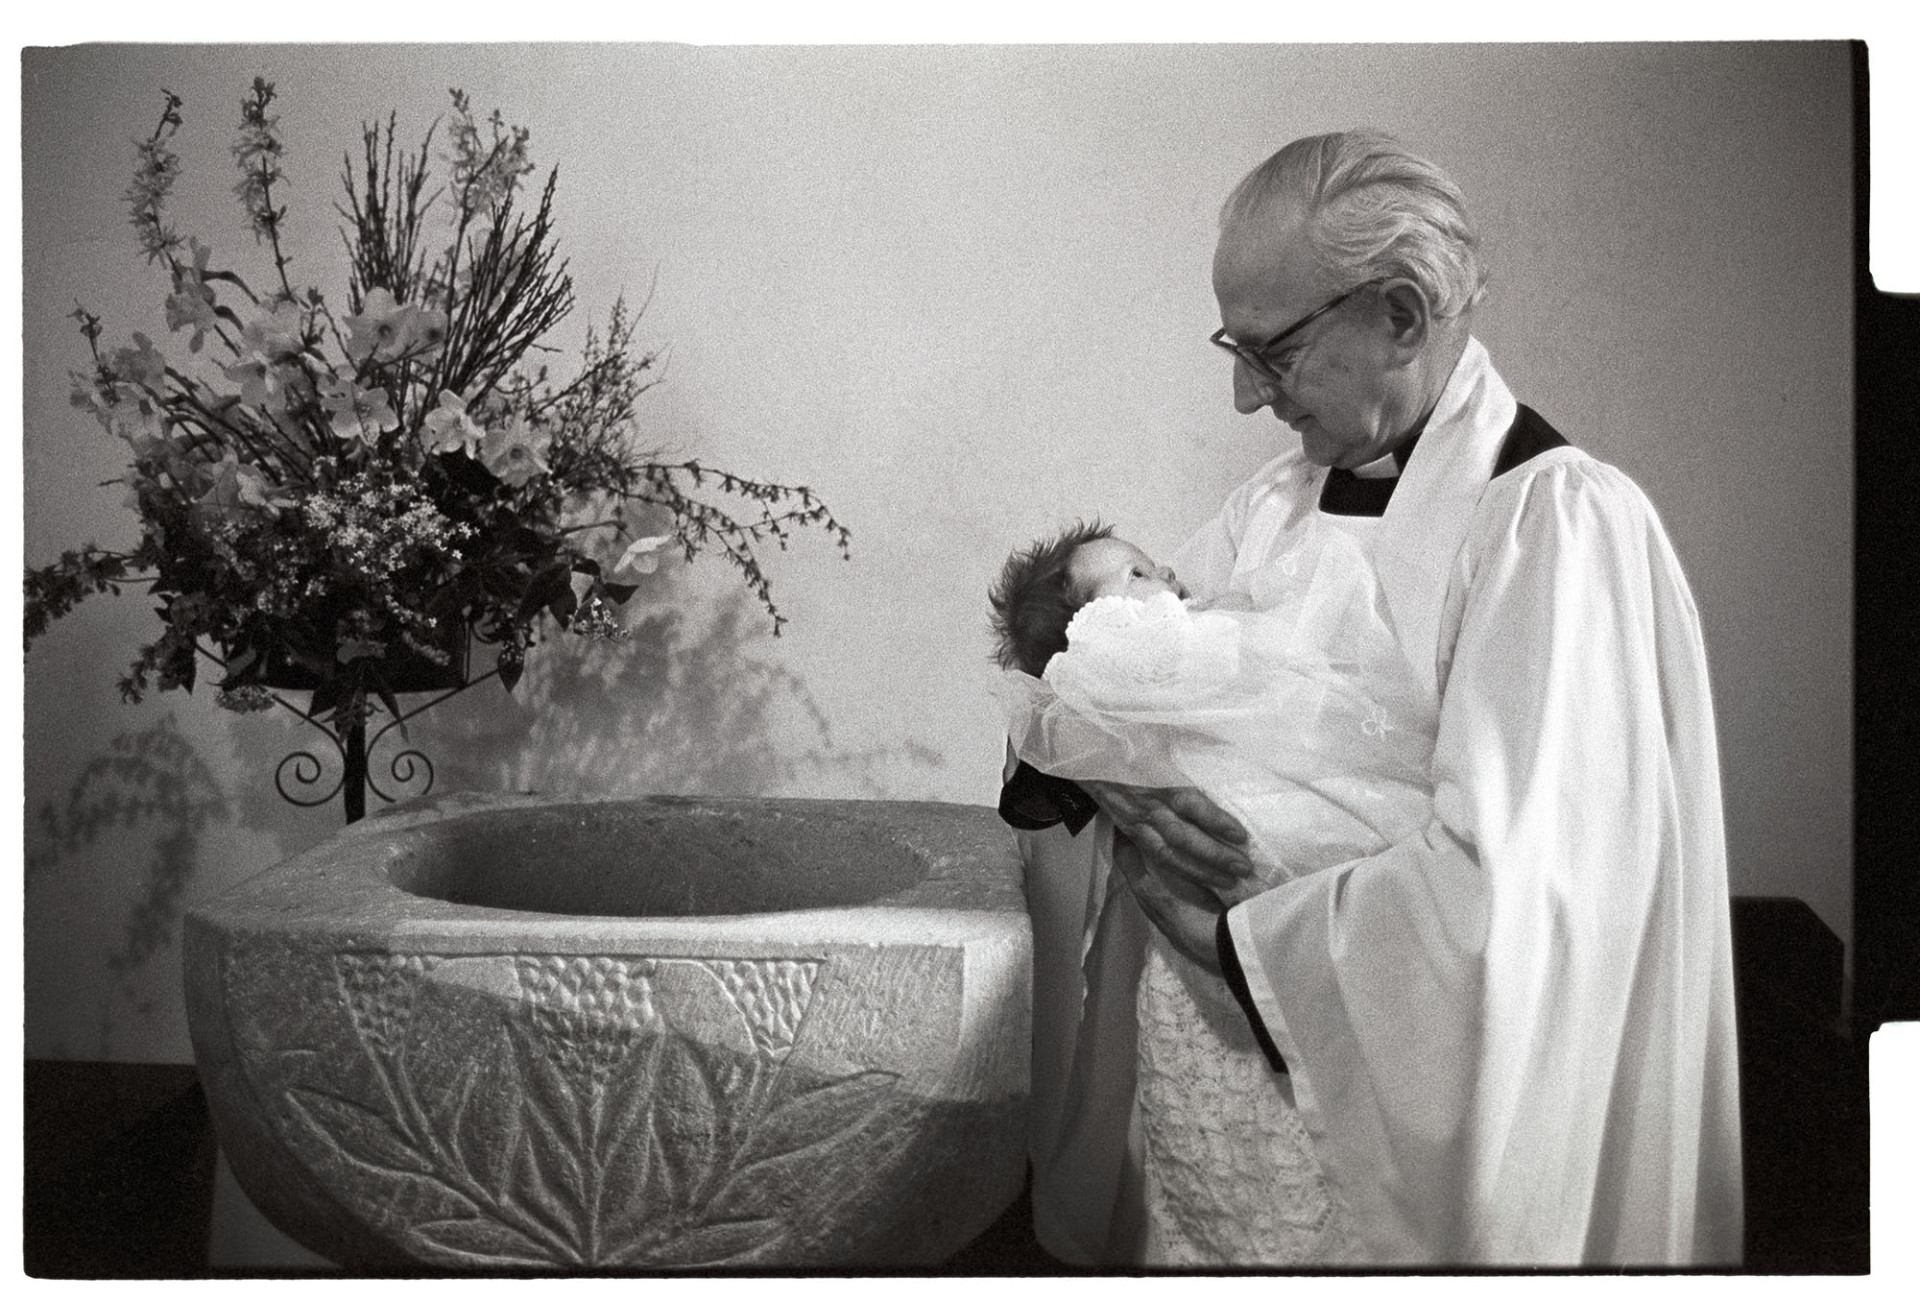 Vicar holding baby at font after christening.
[The Reverend Peter Douglas holding Tina Chastey at the font in Inwardleigh church, after her baptism. A flower arrangement is behind the font.]